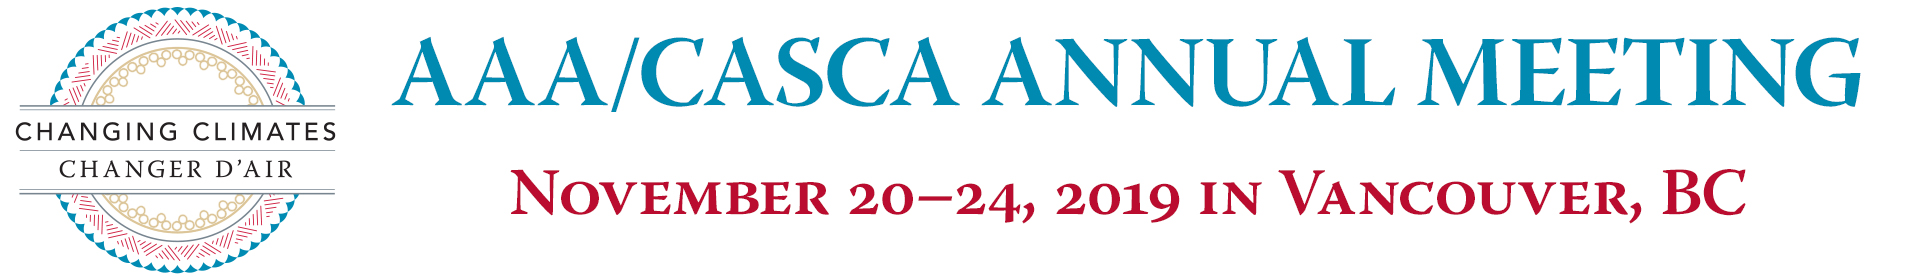 2019 AAA/CASCA Annual Meeting Event Banner